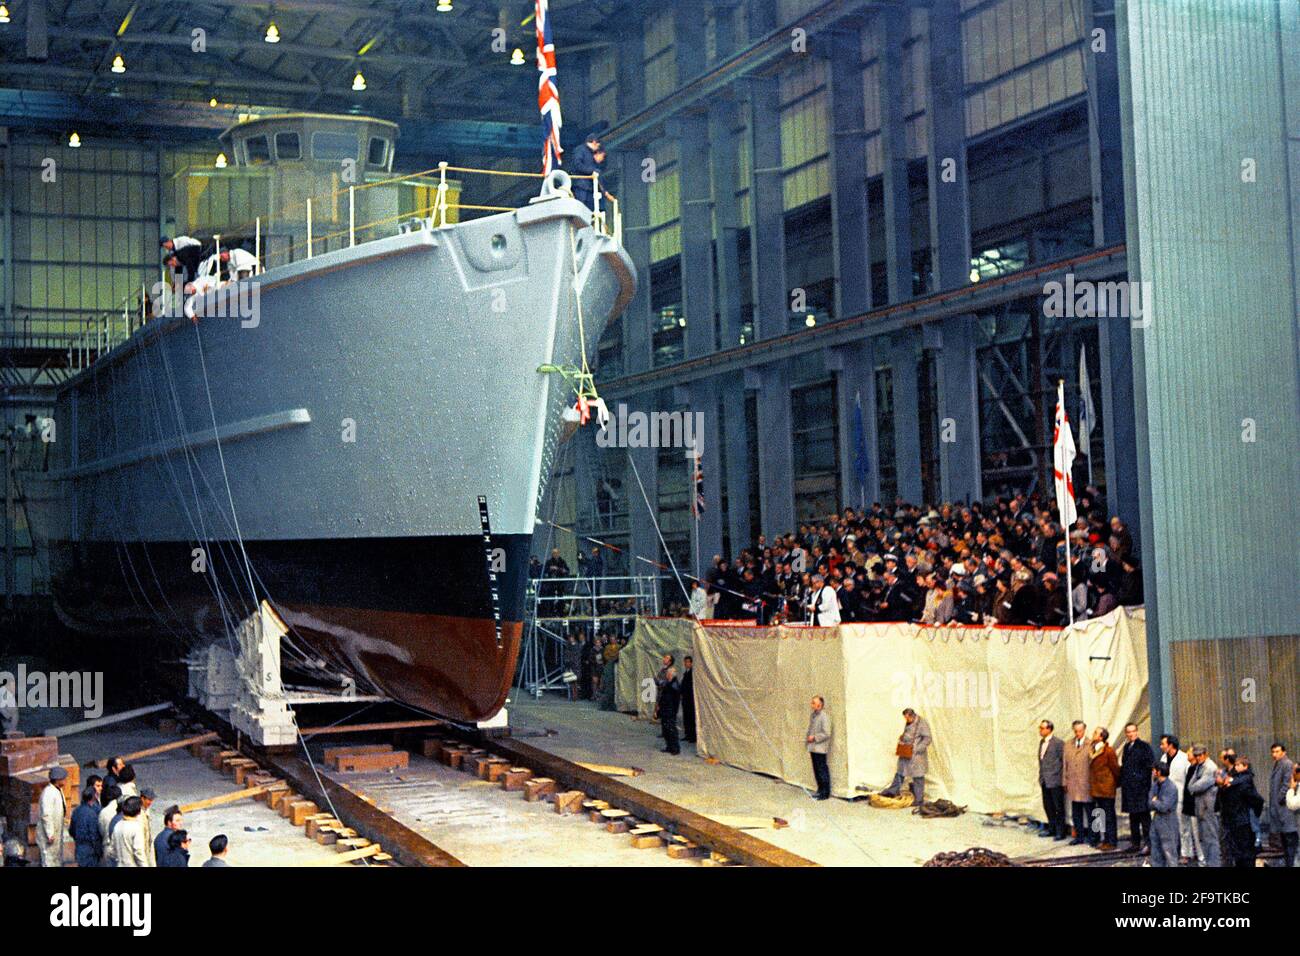 AJAXNETPHOTO. 18TH JANUARY, 1972. WOOLSTON,ENGLAND. - WORLD'S FIRST PLASTIC WARSHIP - HMS WILTON, A ROYAL NAVY MINEHUNTER BASED ON THE 'TON' CLASS DESIGN, WAS THE WORLD'S FIRST WARSHIP TO BE CONSTRUCTED IN GLASS FIBRE BY VOSPER THORNYCROFT AT ITS WOOLSTON FACILITY.  THE LAUNCHING CEREMONY IS UNDER WAY IN THIS PHOTO.  PHOTO:JONATHAN EASTLAND/AJAX.  REF:544160 1 11 Stock Photo